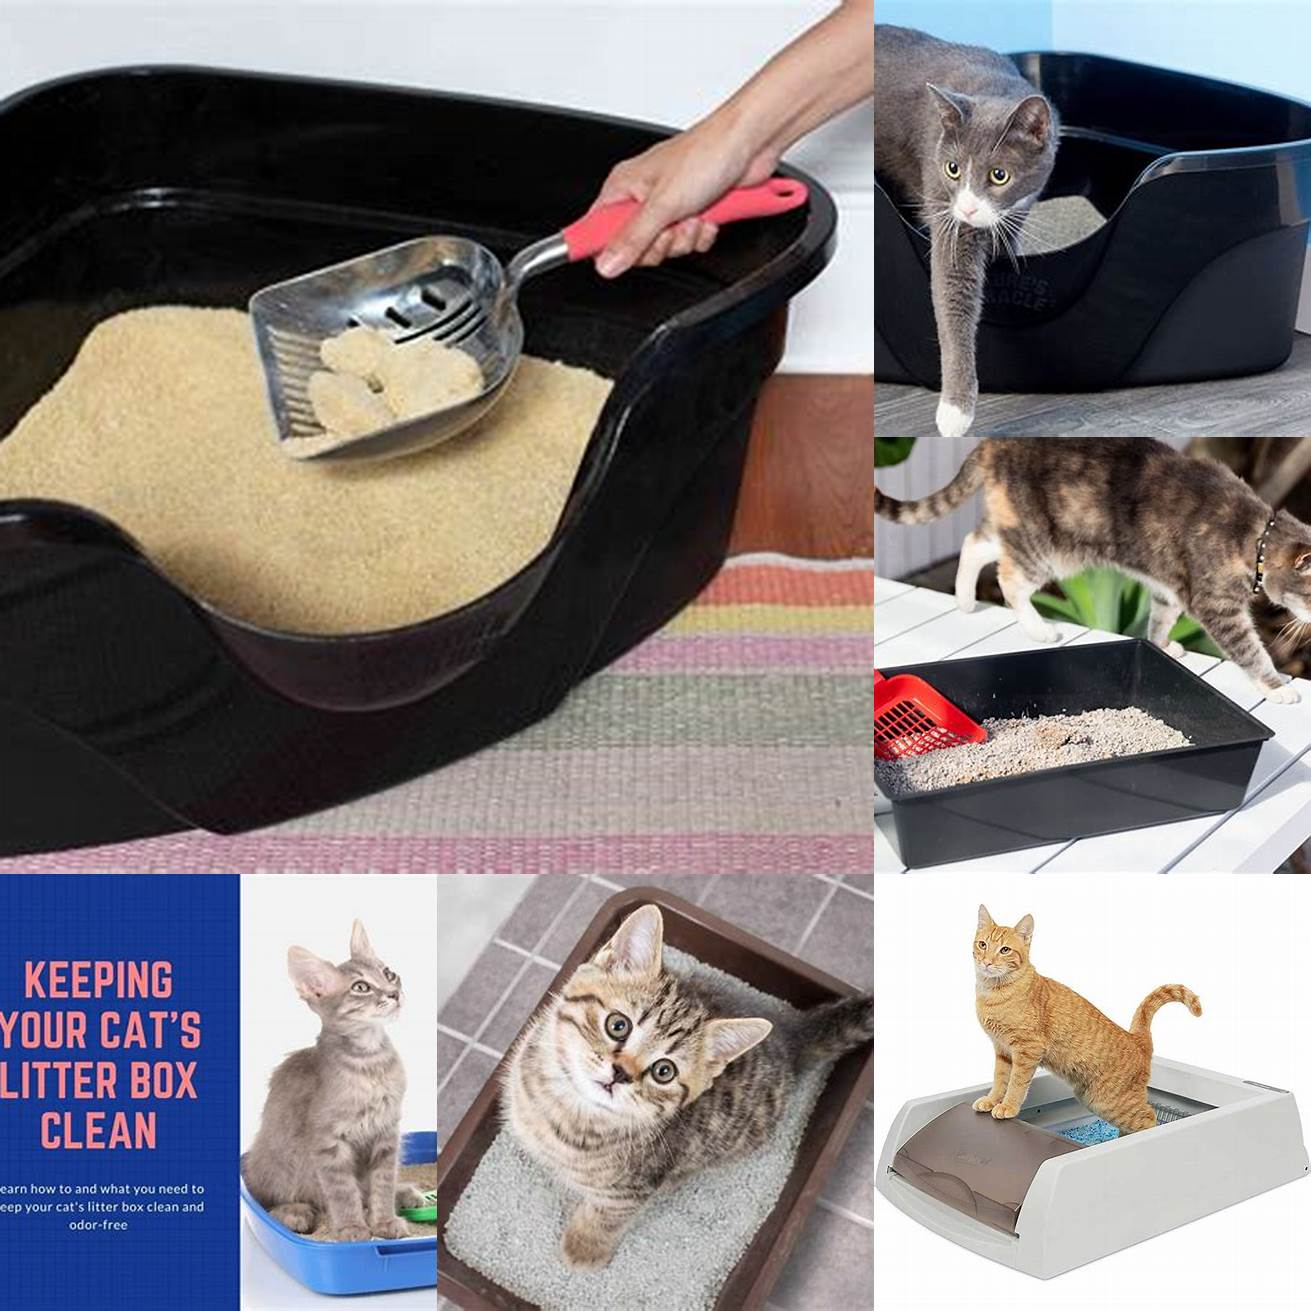 Keep your cats litter box clean